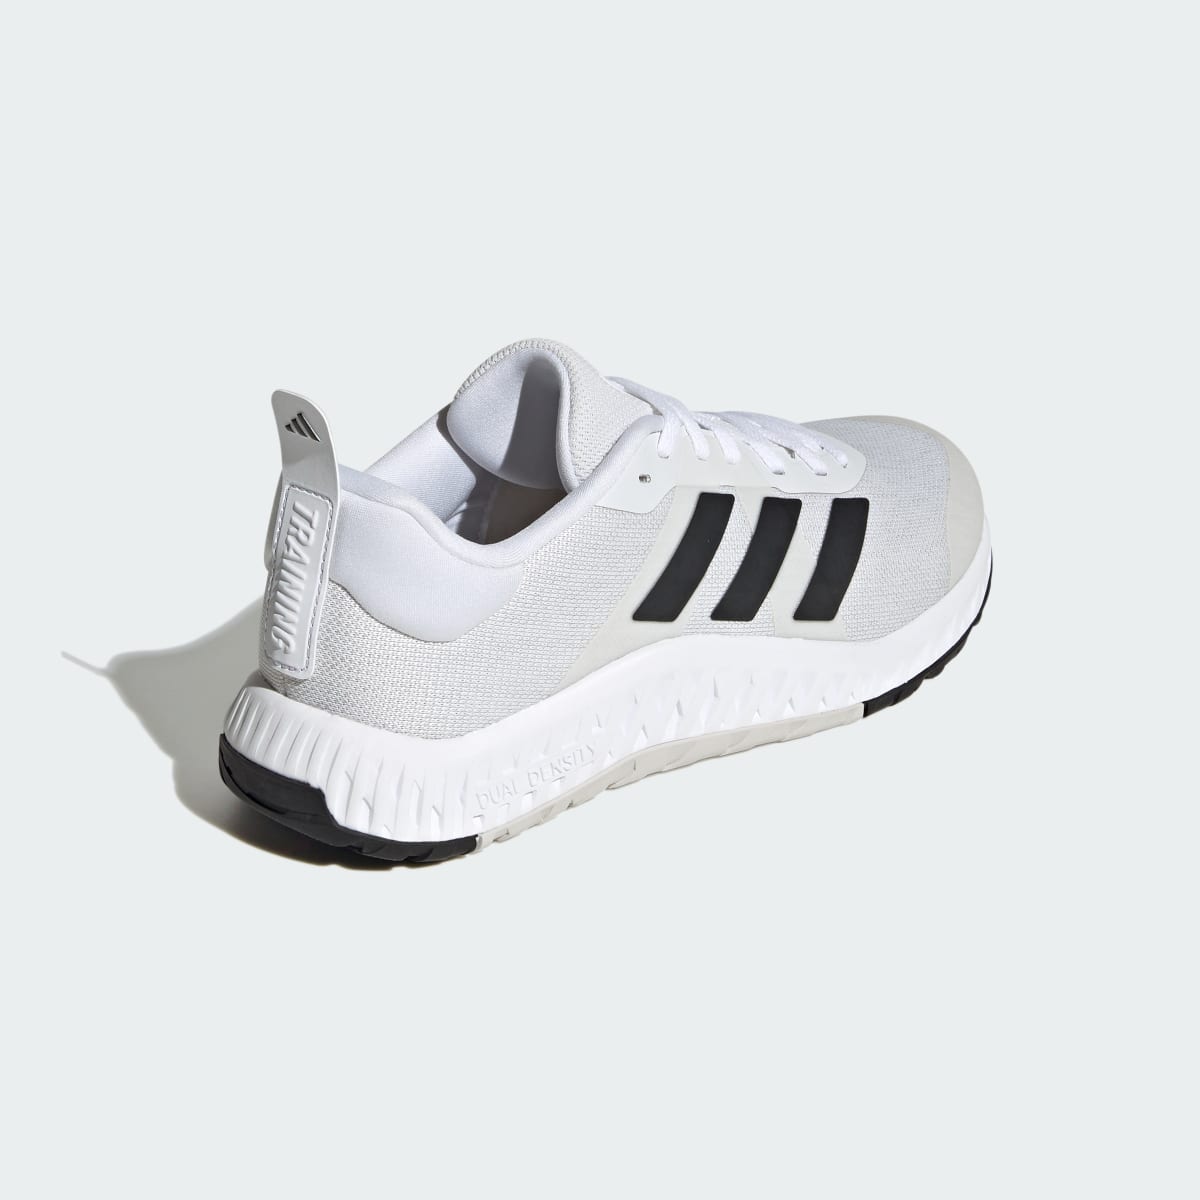 Adidas Everyset Trainer Shoes. 6